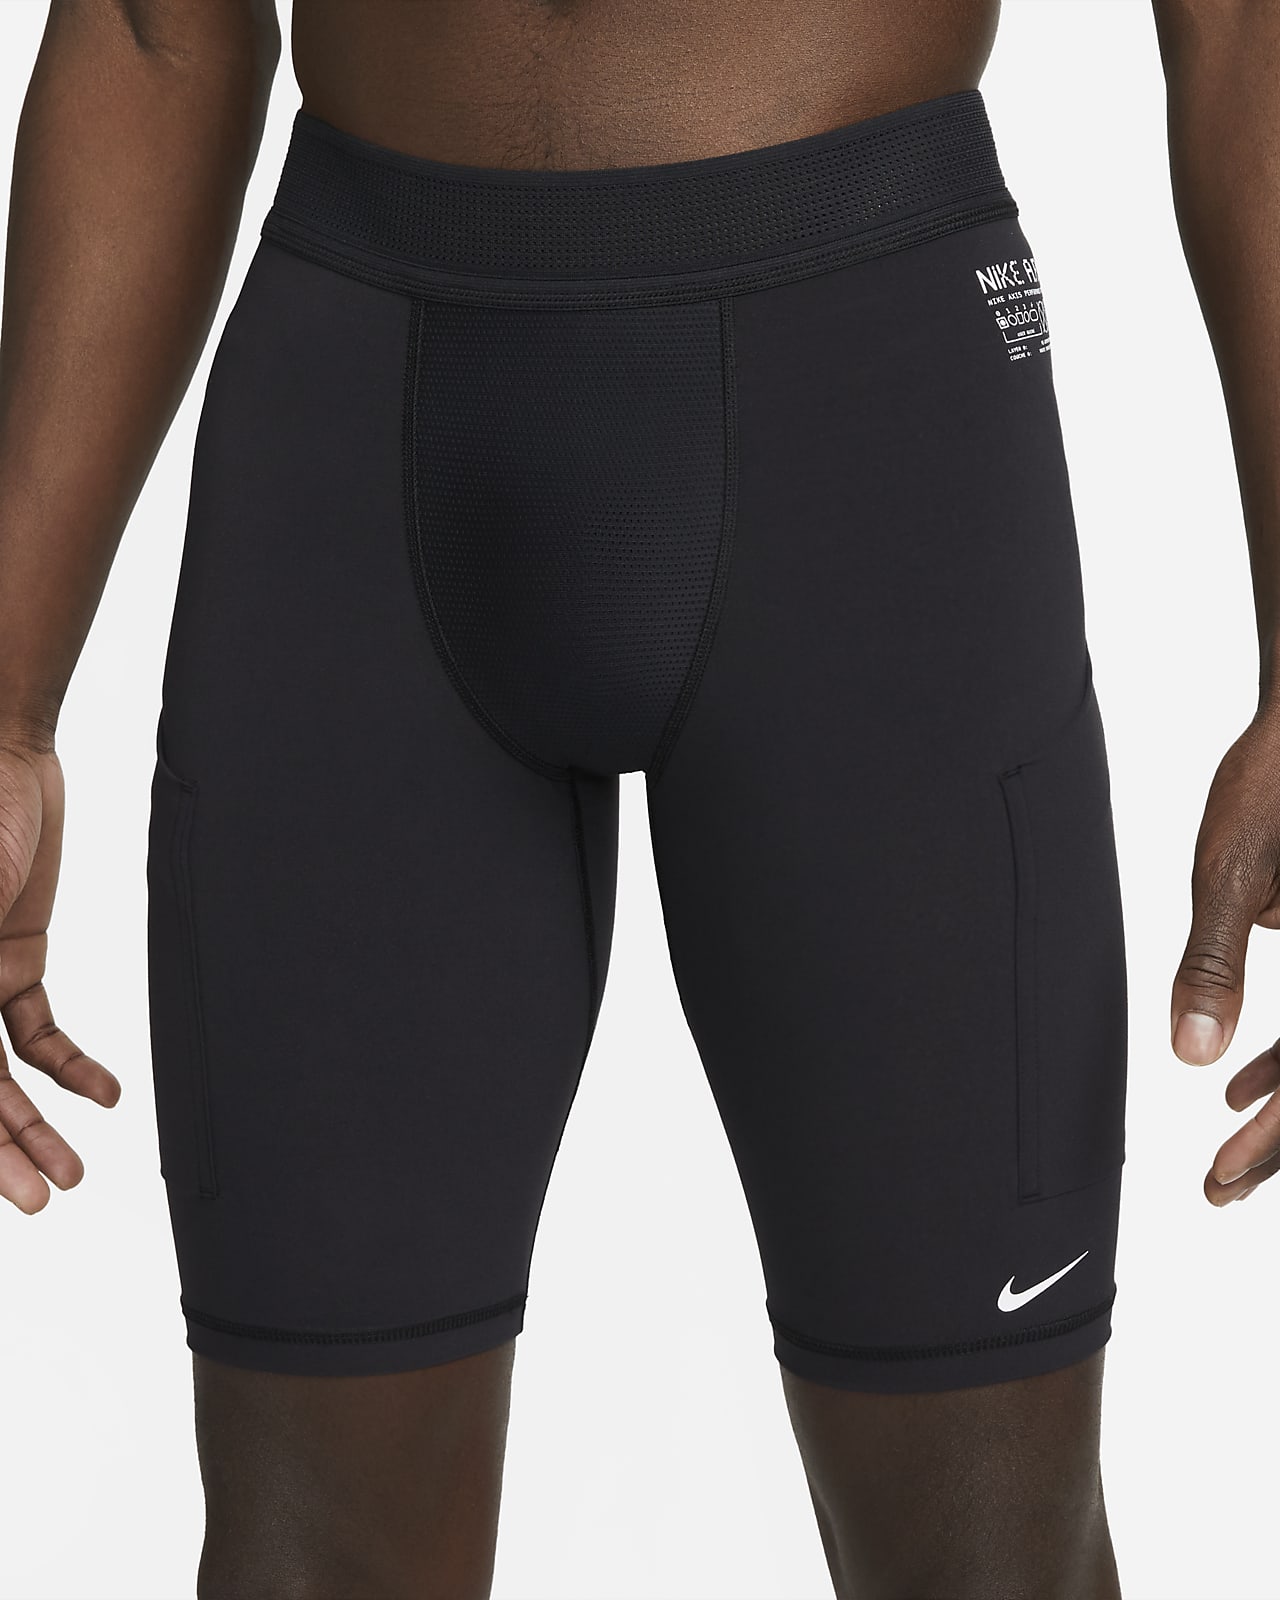 NIKE Men's Base Layer Training Compression Tights - Size Small